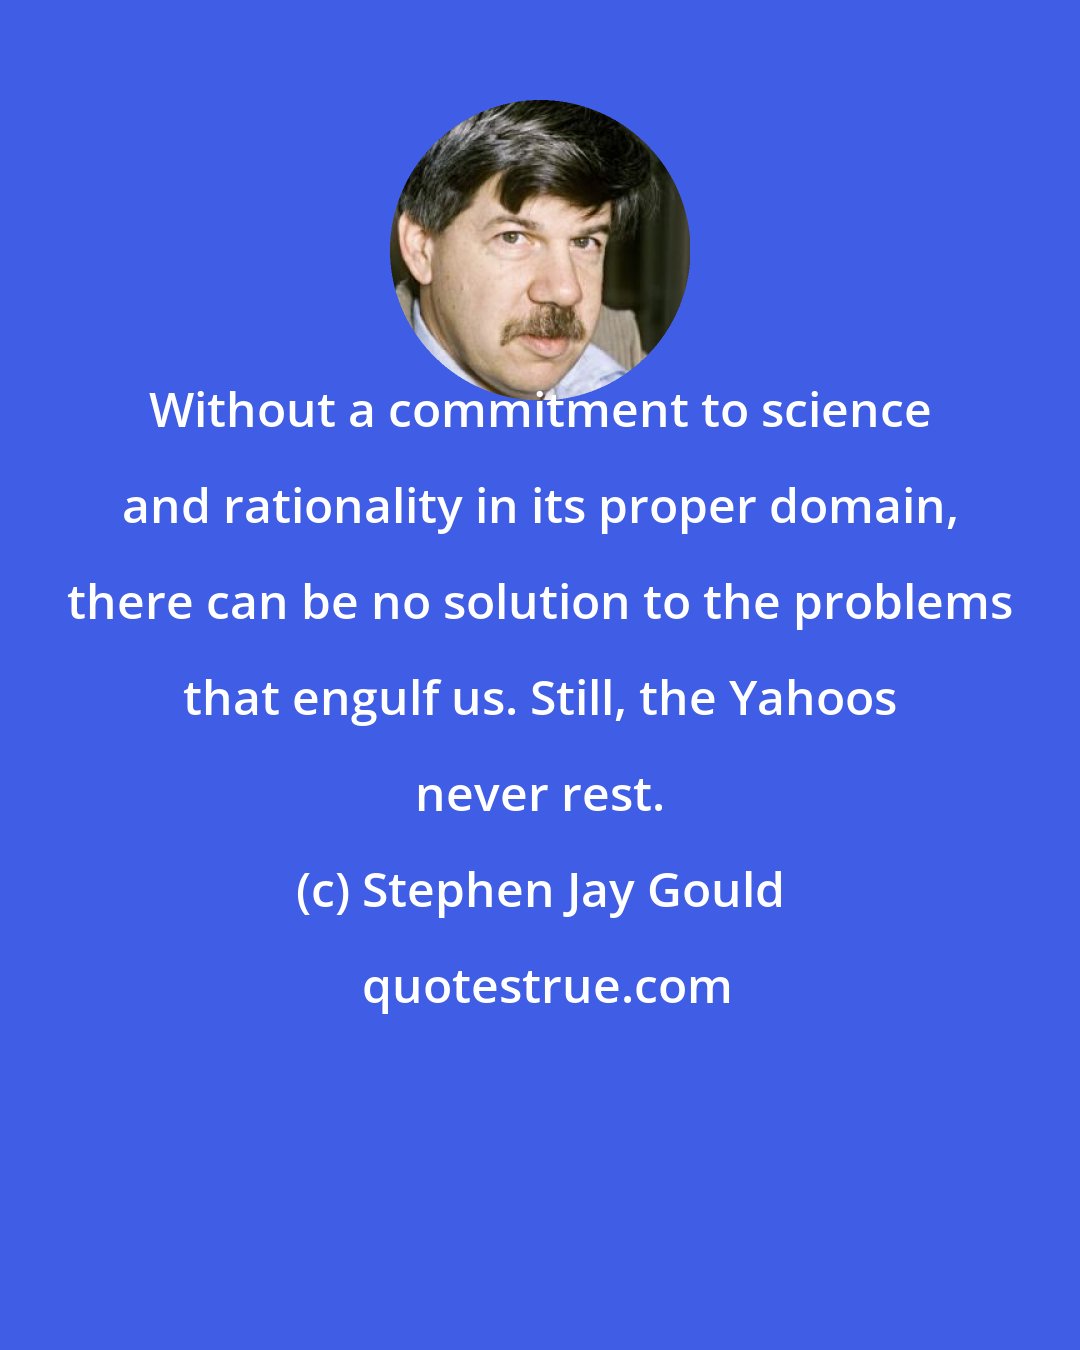 Stephen Jay Gould: Without a commitment to science and rationality in its proper domain, there can be no solution to the problems that engulf us. Still, the Yahoos never rest.